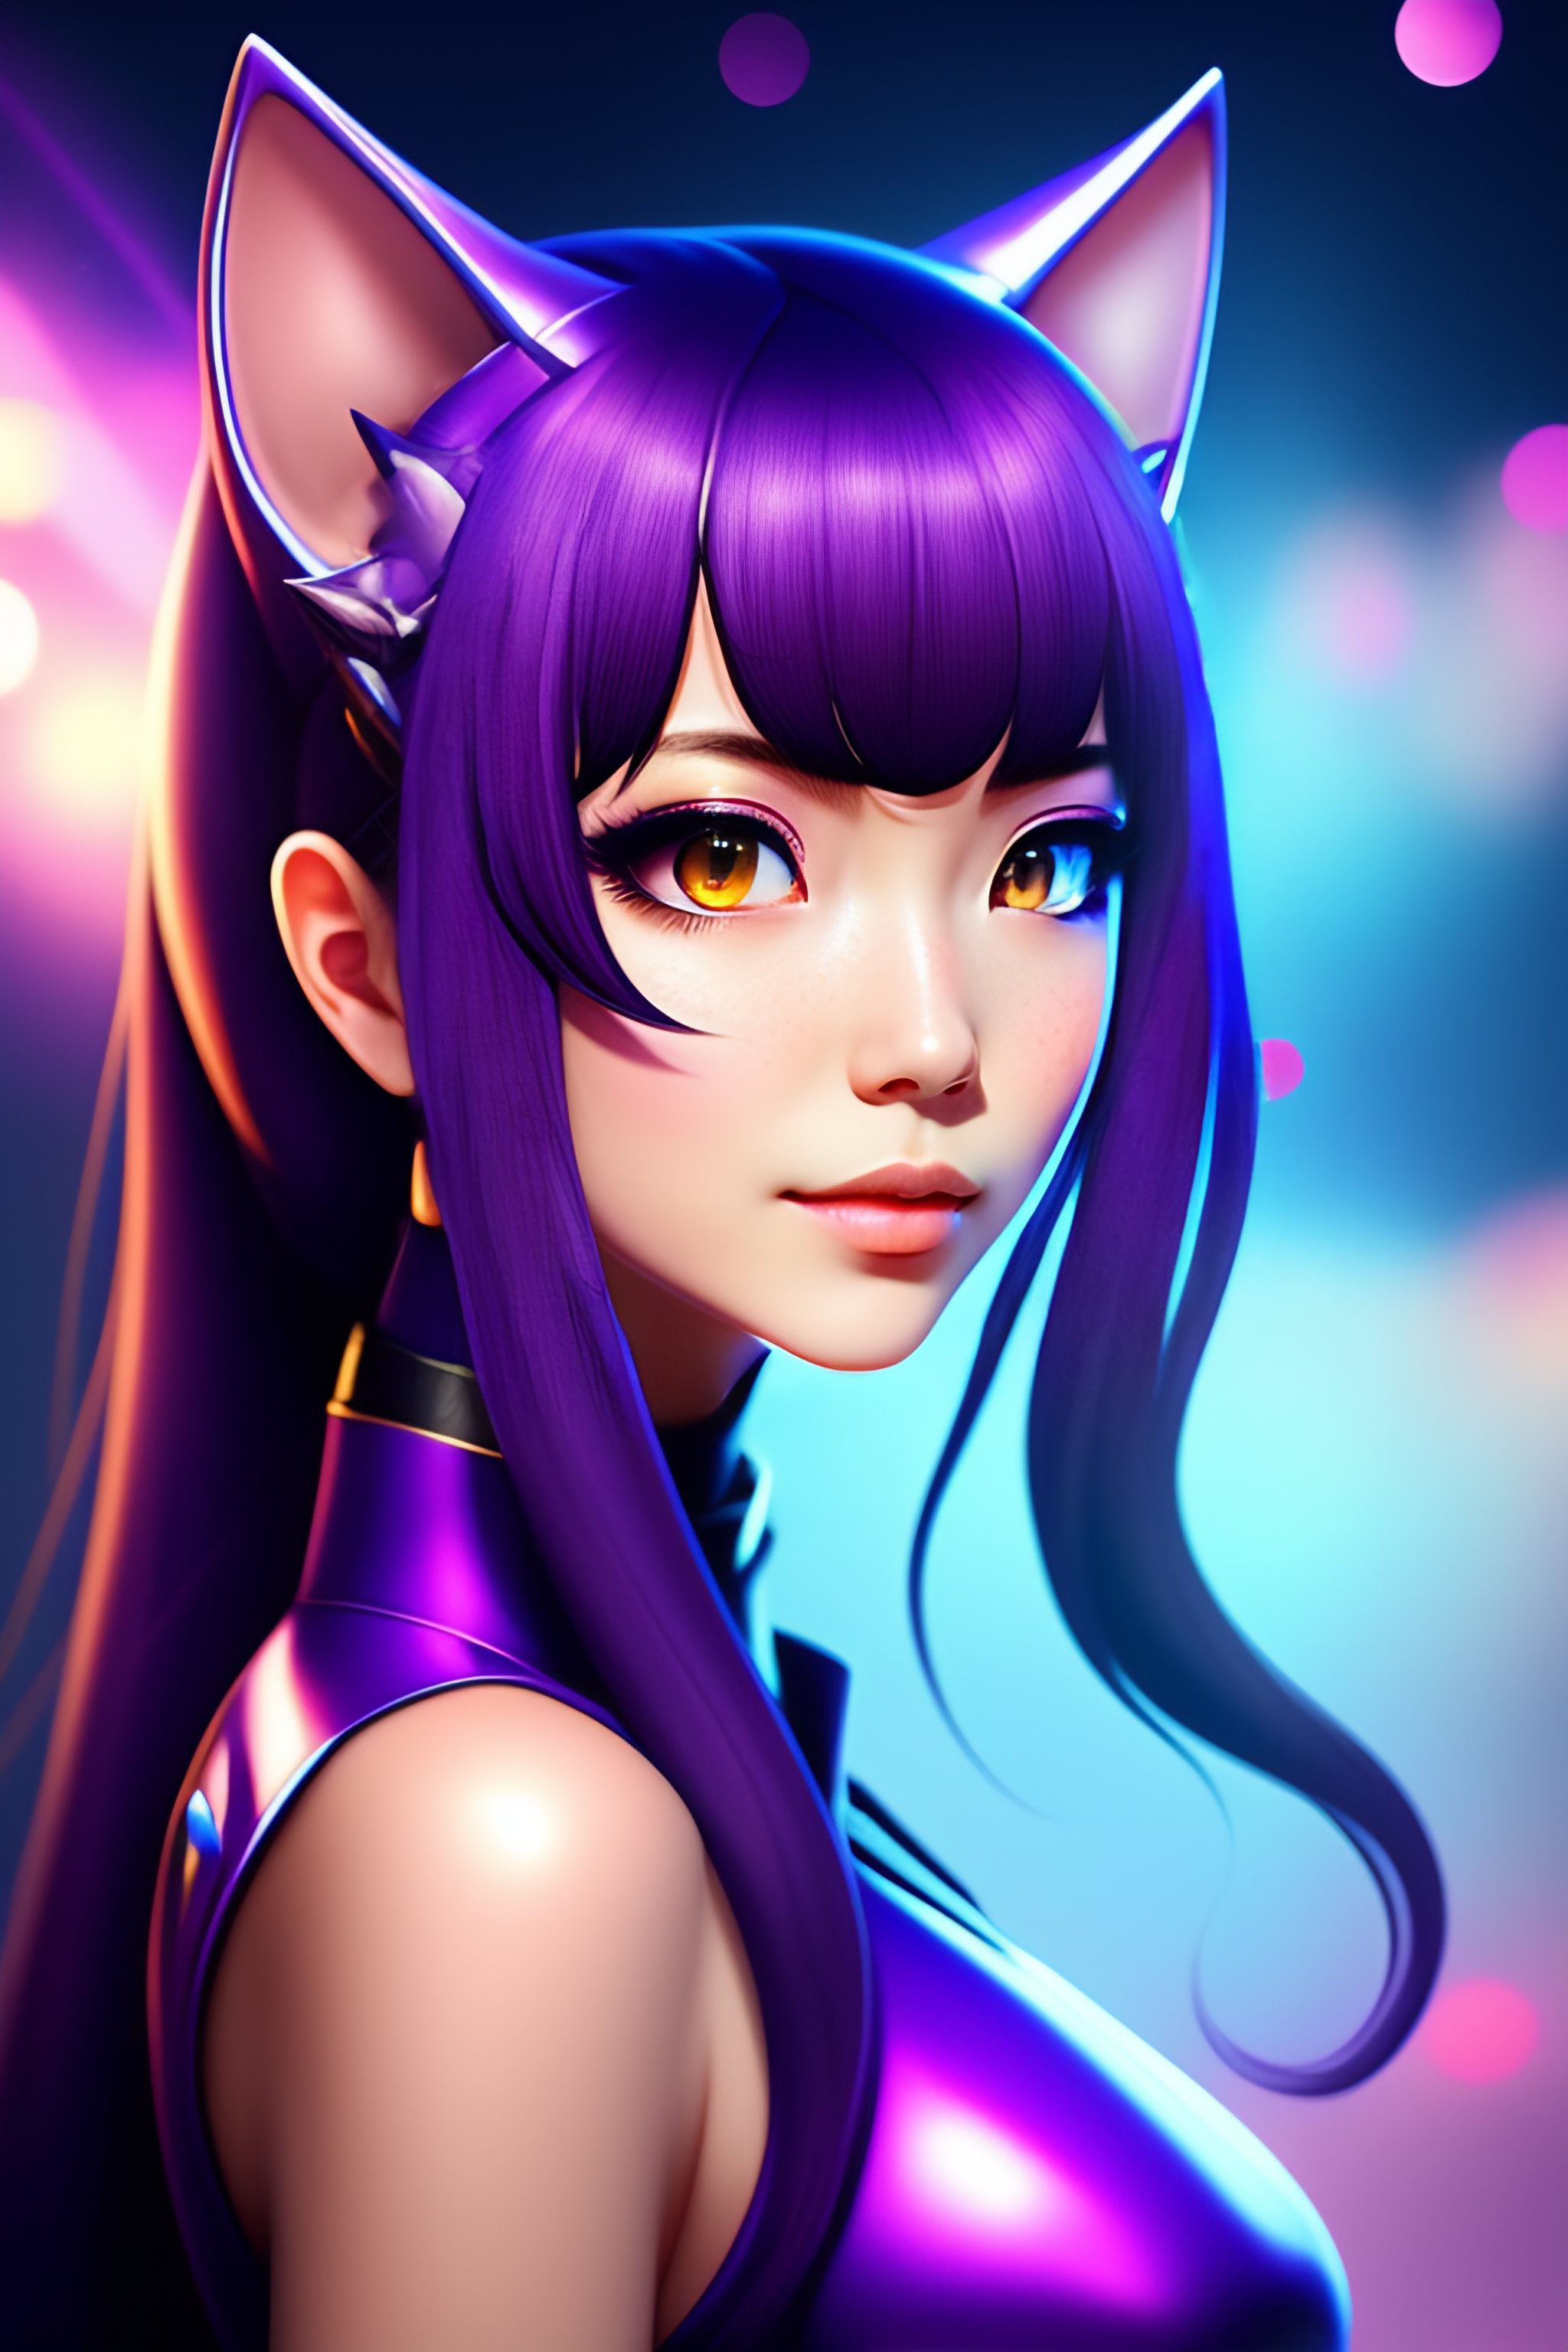 Lexica - Purple cat girl profile picture, anime style, cat ears